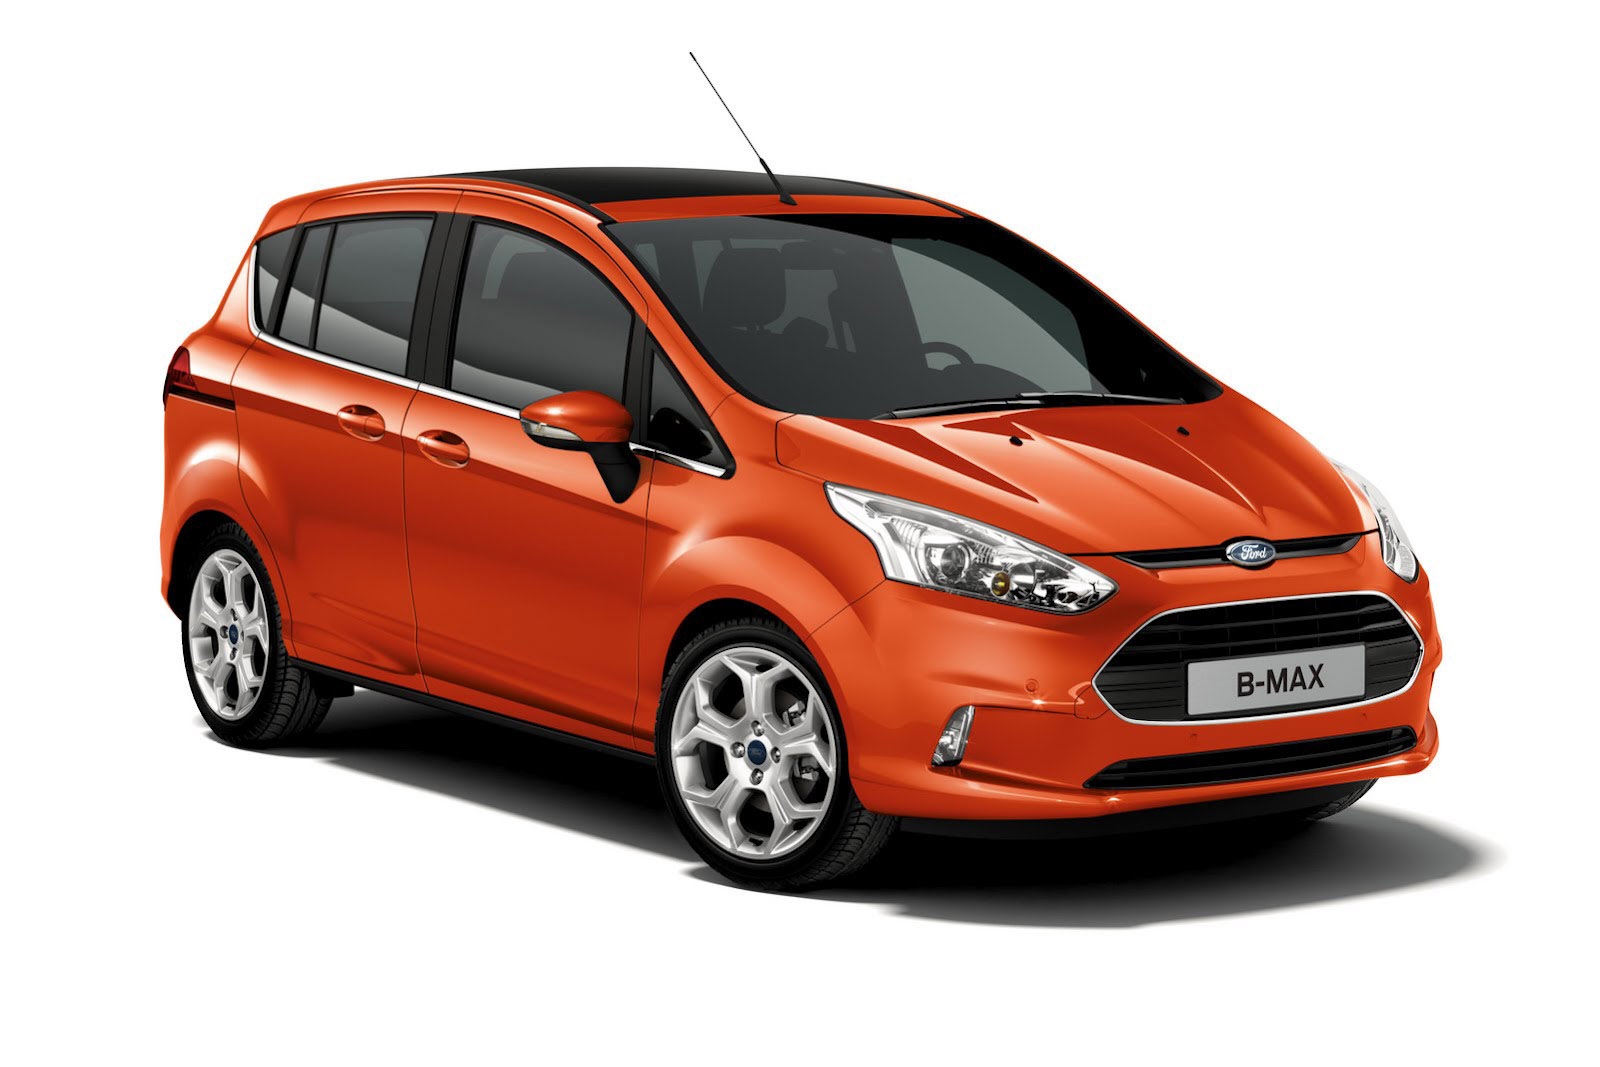 Compact Car With Sliding Doorsnew 2012 ford b max opens up to us shows its sliding doors